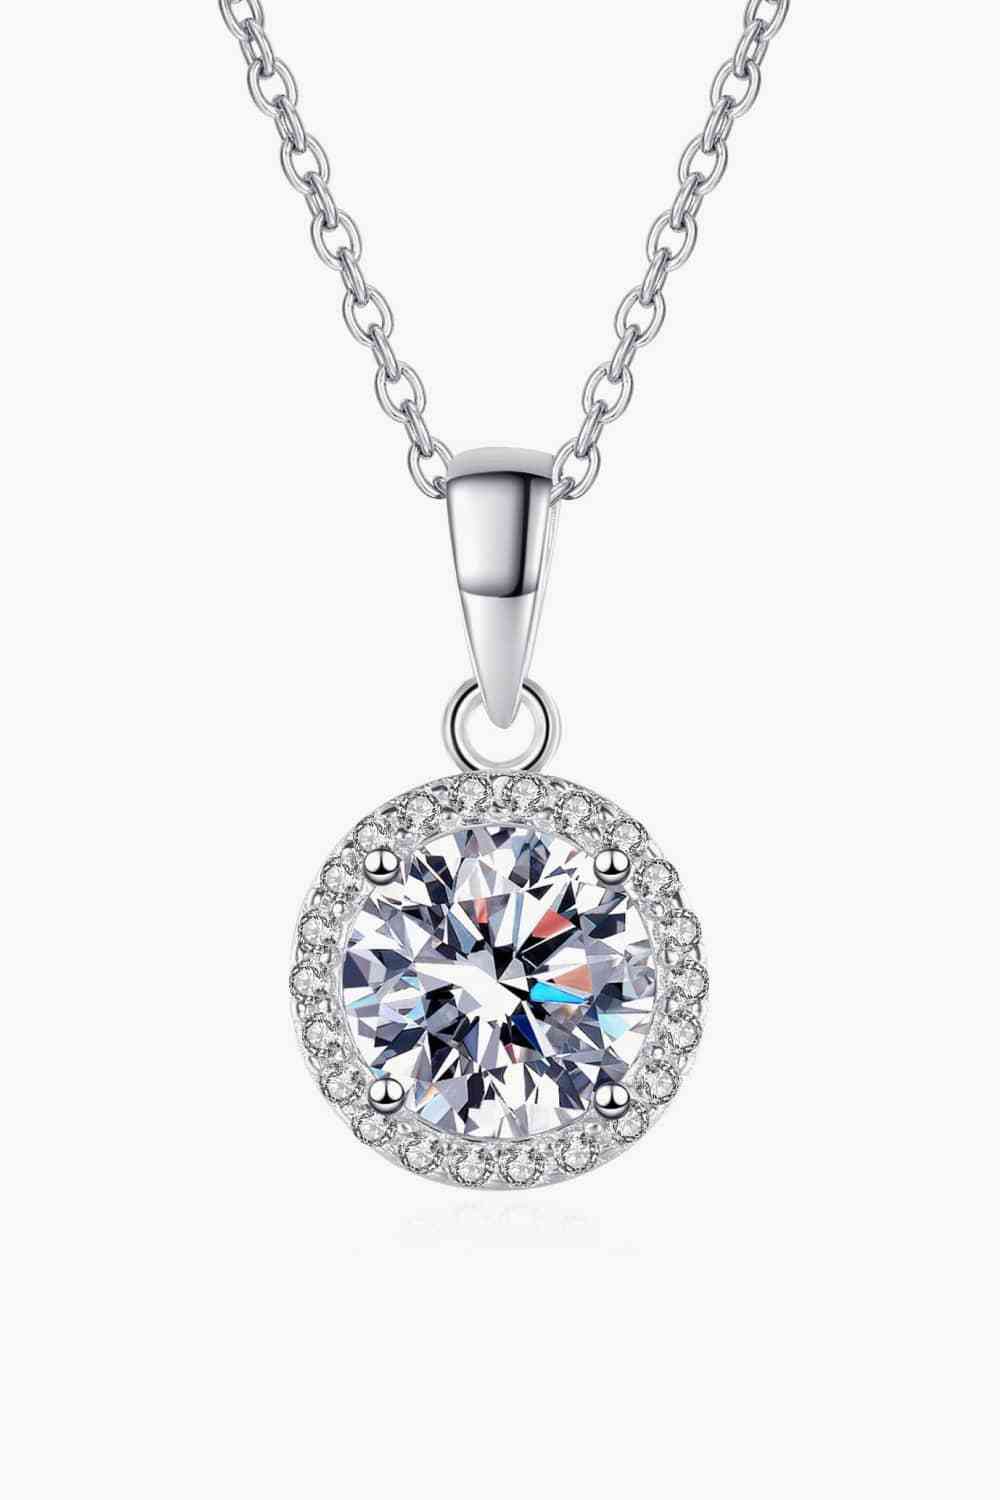 Adored Chance to Charm 1 Carat Moissanite Round Pendant Chain Necklace - Kings Crown Jewel Boutique